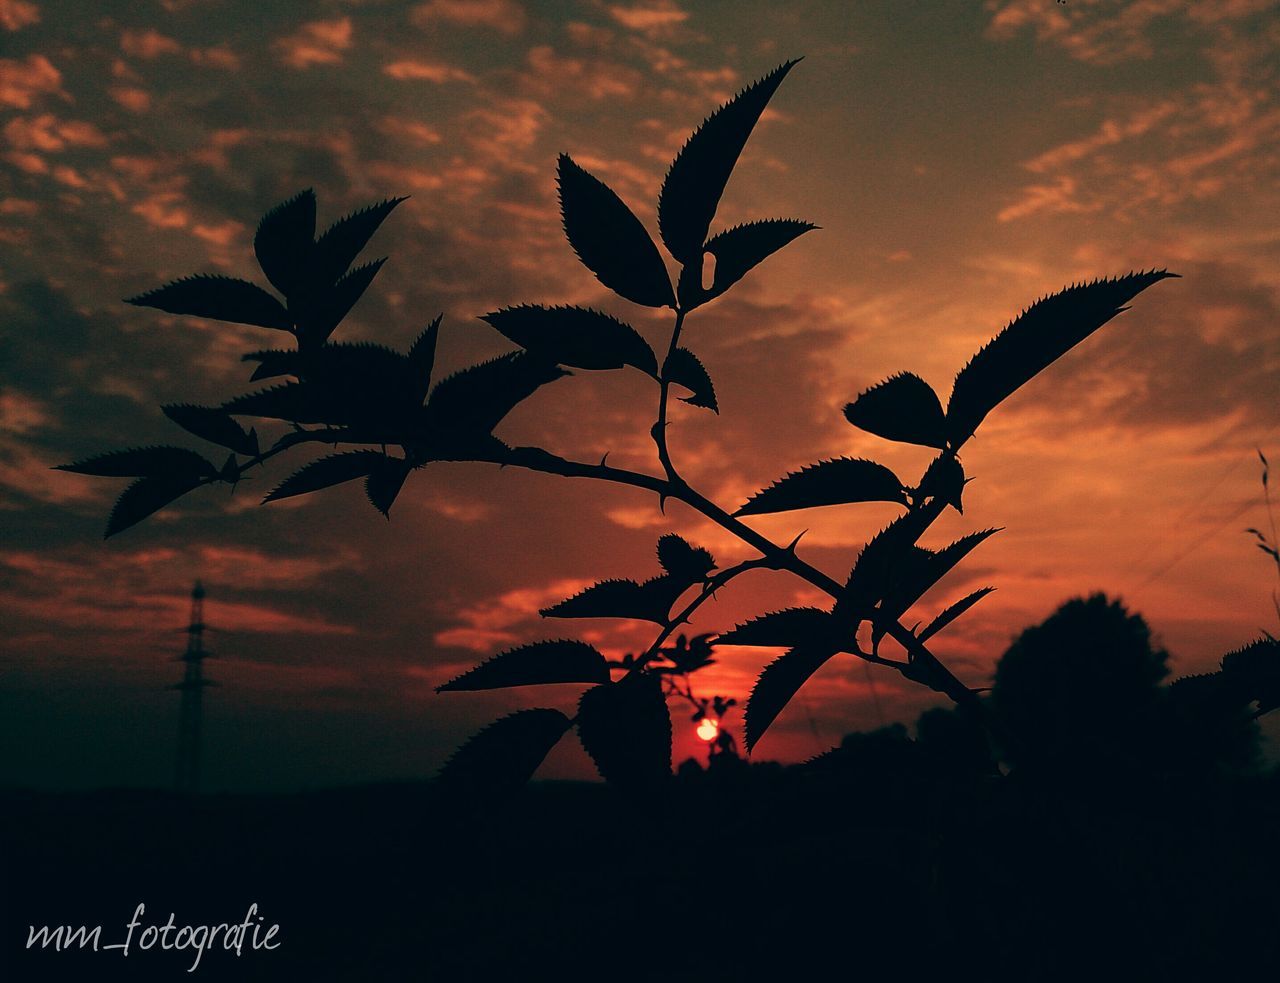 sunset, silhouette, sky, tree, tranquility, beauty in nature, cloud - sky, scenics, leaf, branch, nature, orange color, tranquil scene, growth, cloud, cloudy, idyllic, dramatic sky, low angle view, outdoors